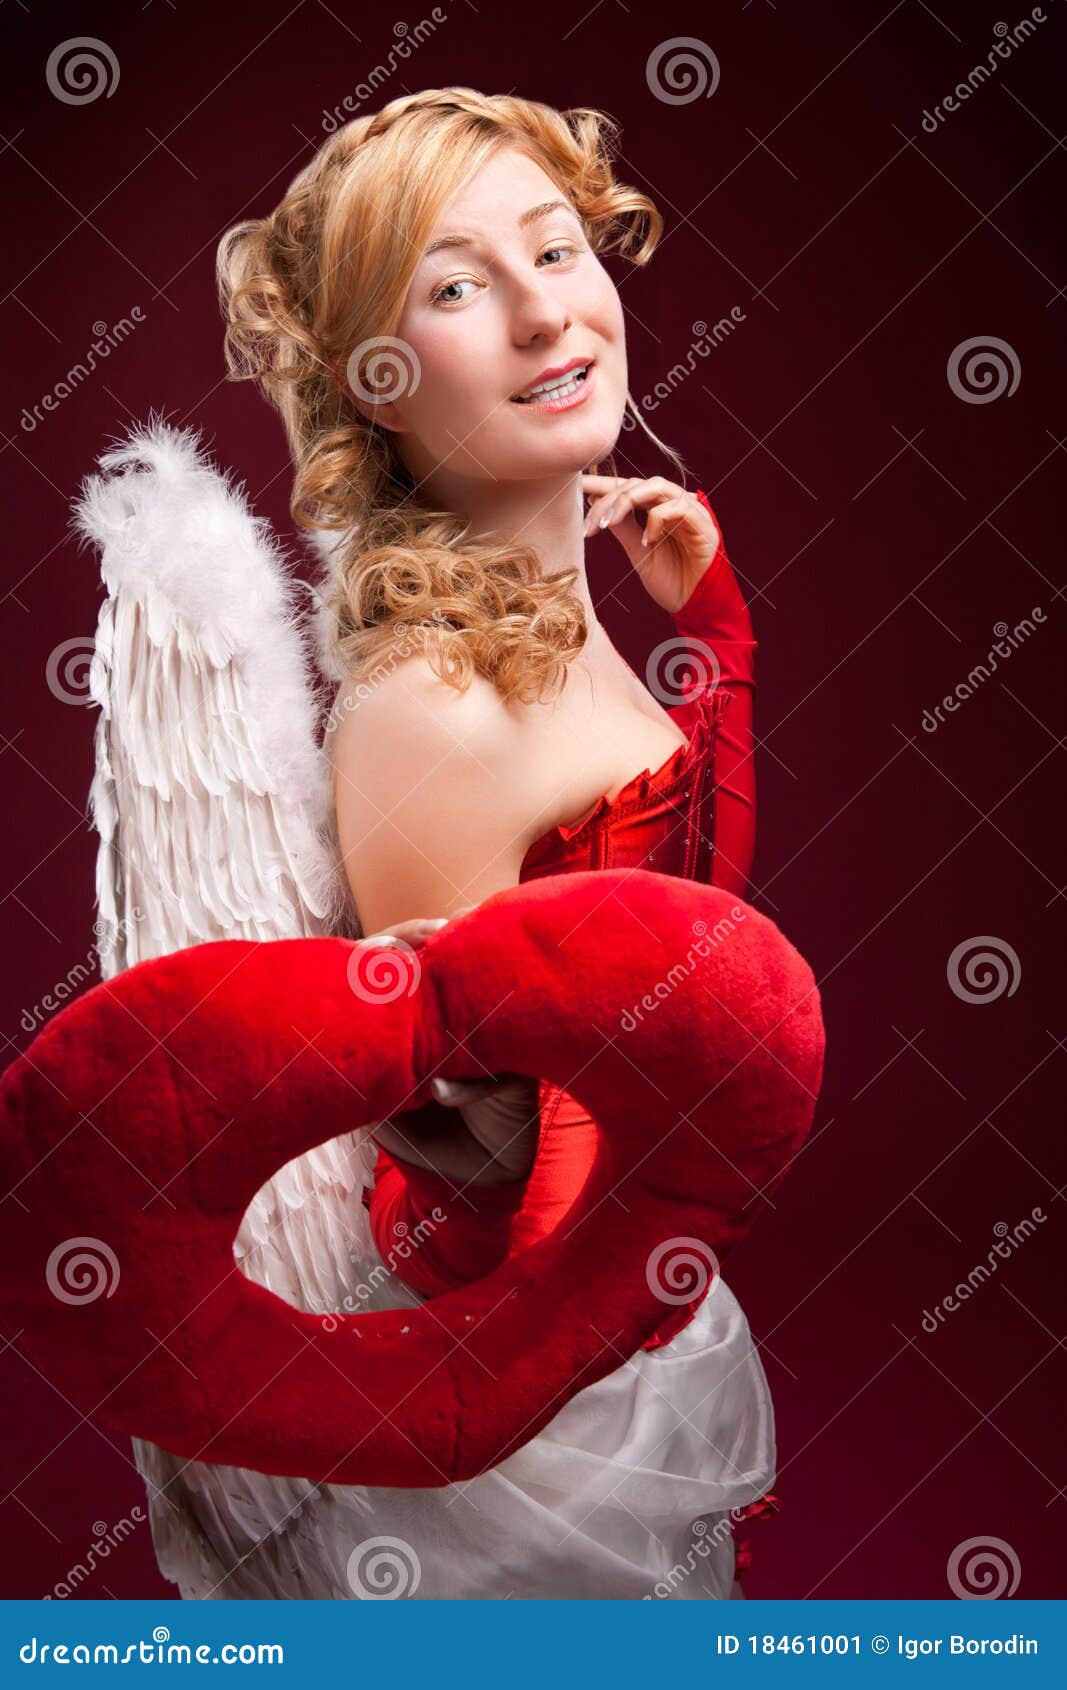 Perfect Blonde Angel With A Red Heart Stock Image Image Of Model Lovely 18461001